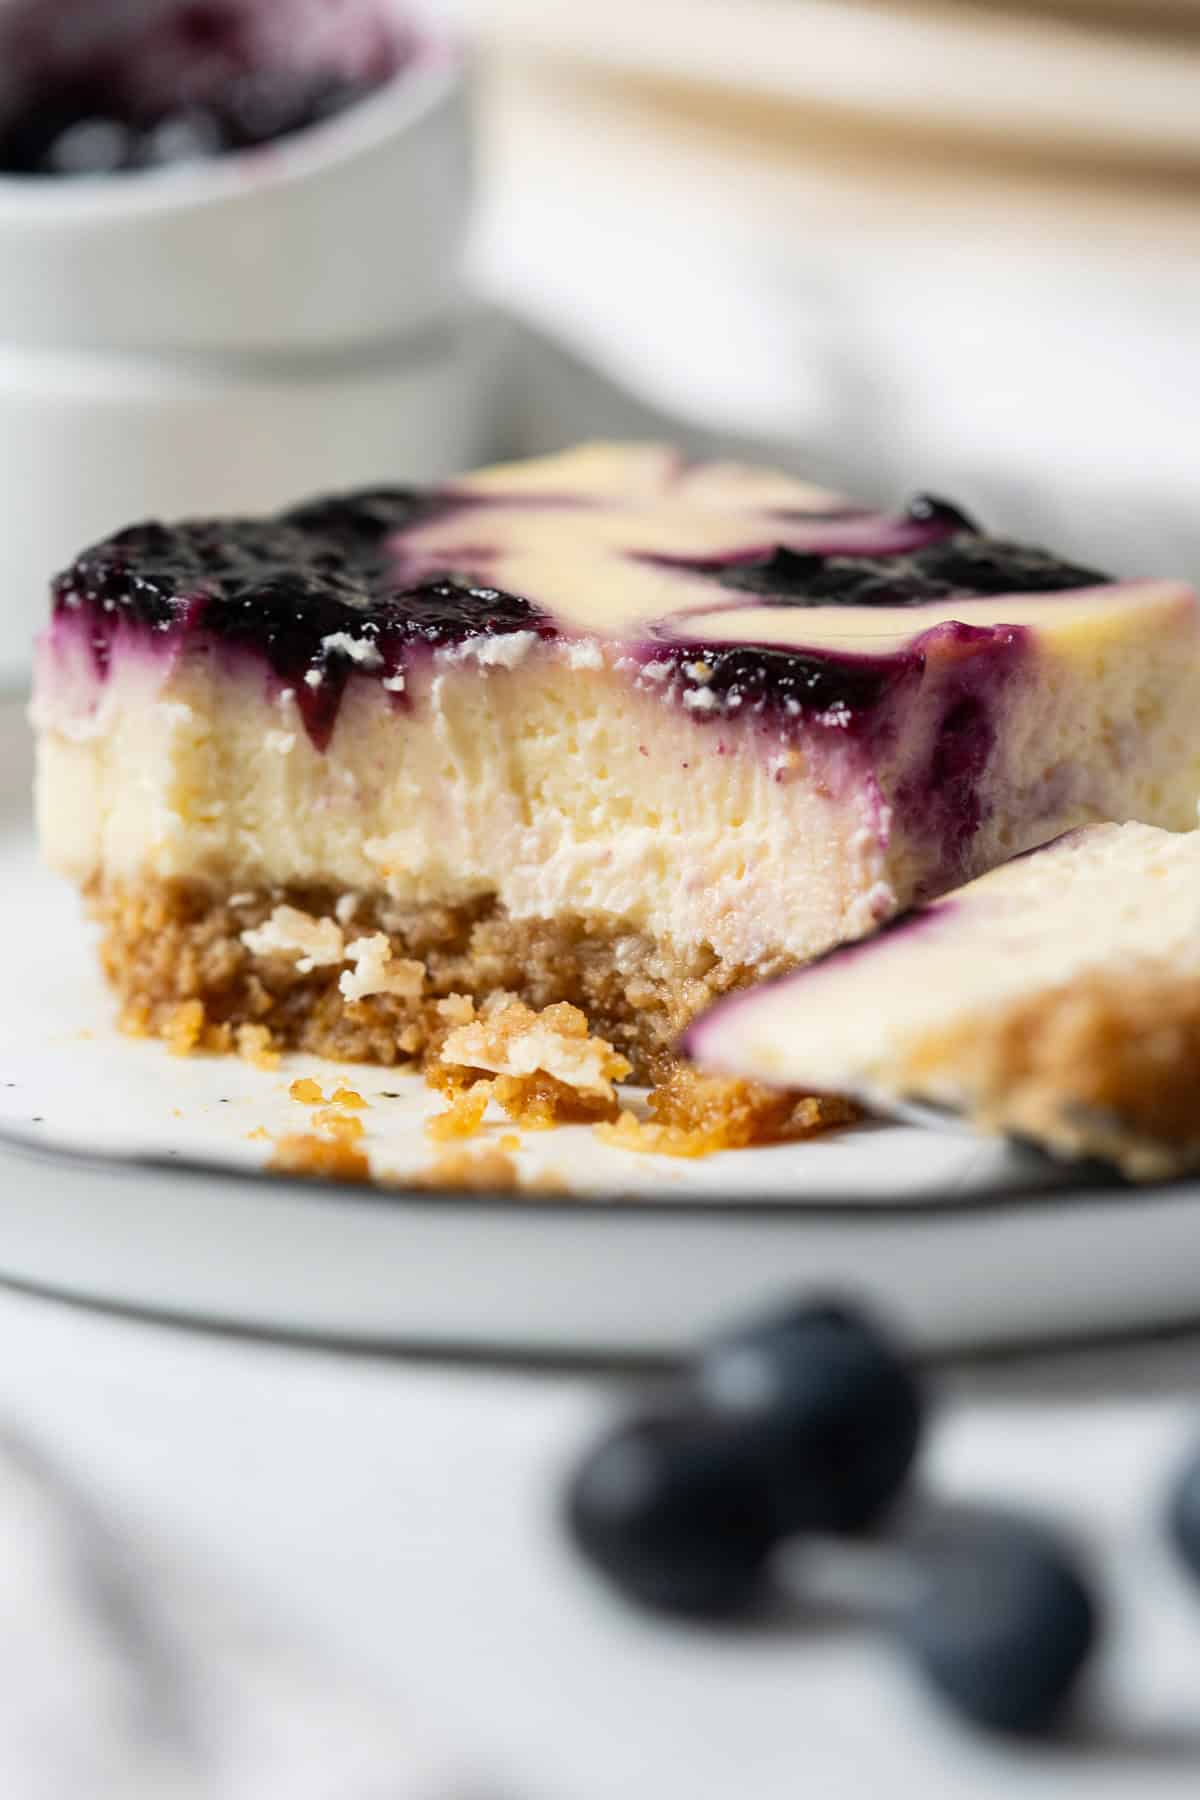 Showing the creamy texture of a half-eaten slice of blueberry cheesecake bar.